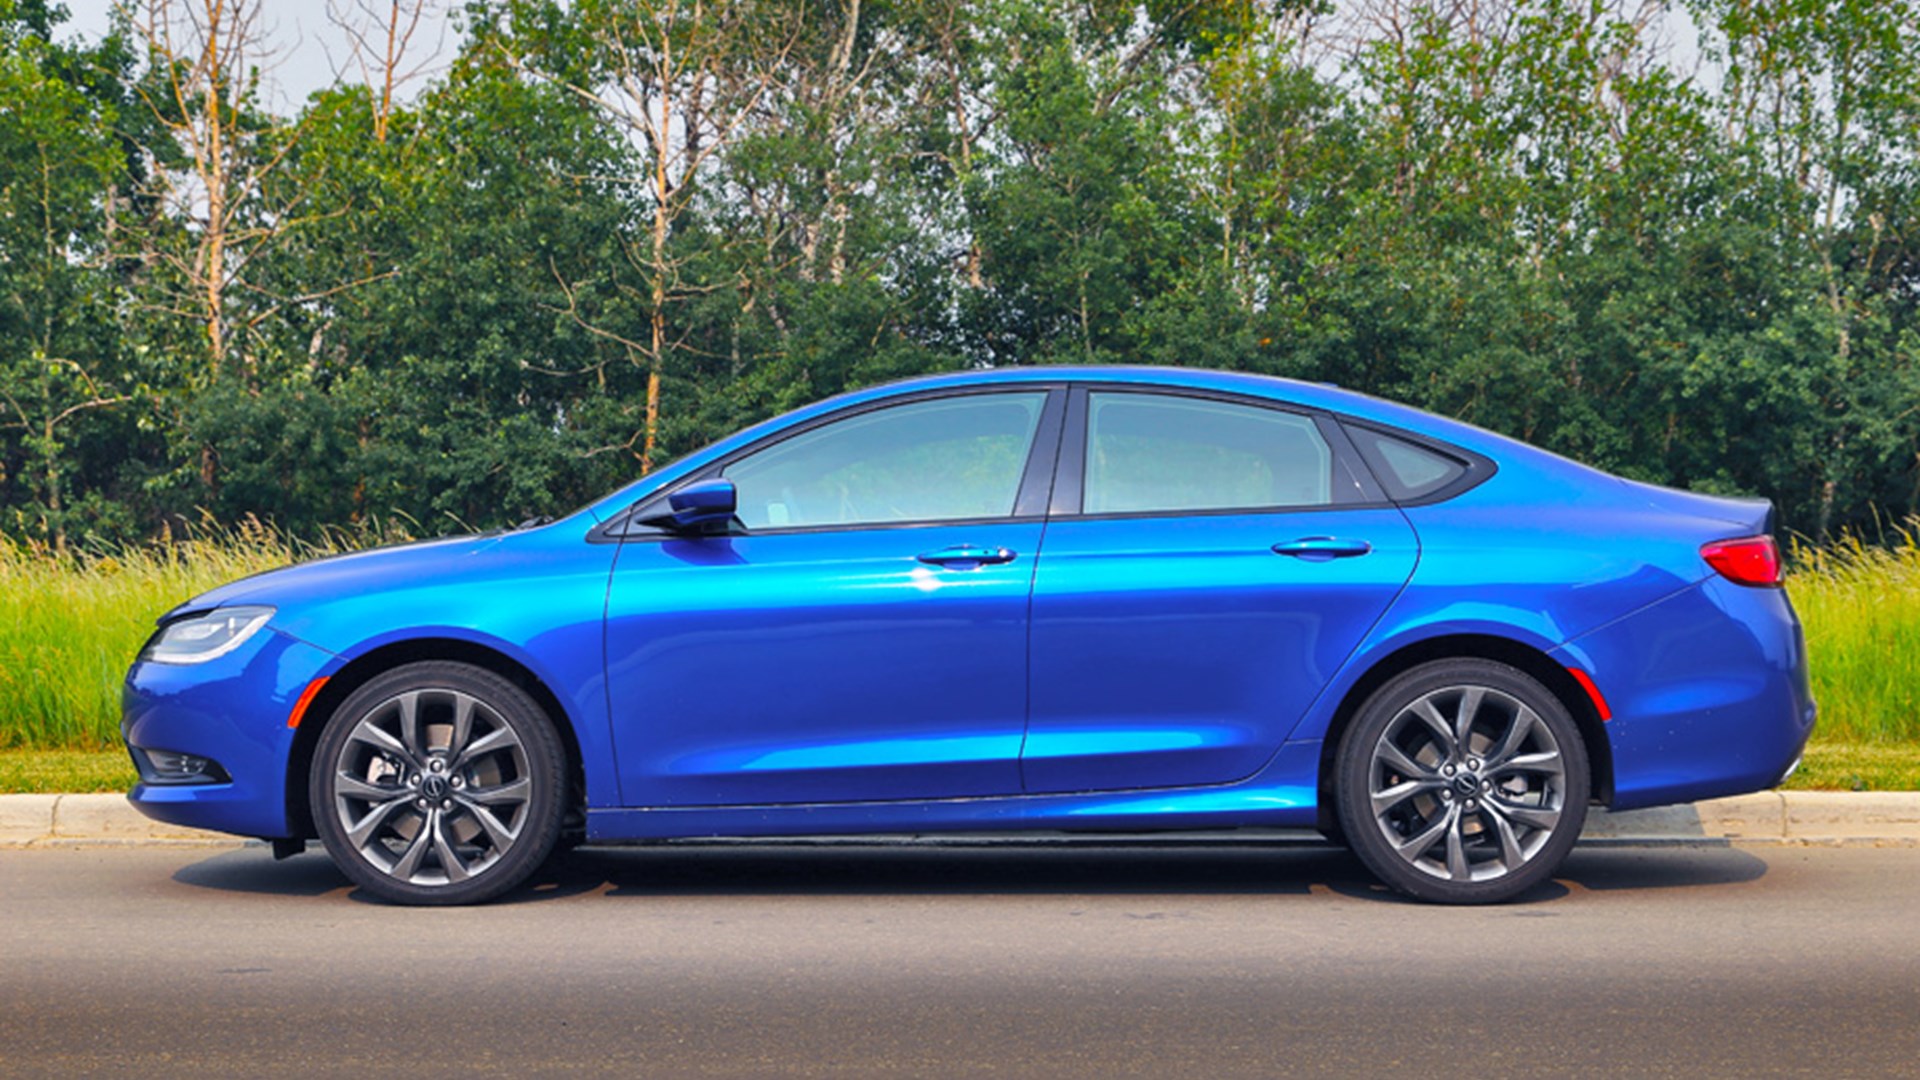 2015-2017 Chrysler 200 Used Vehicle Review | AutoTrader.ca